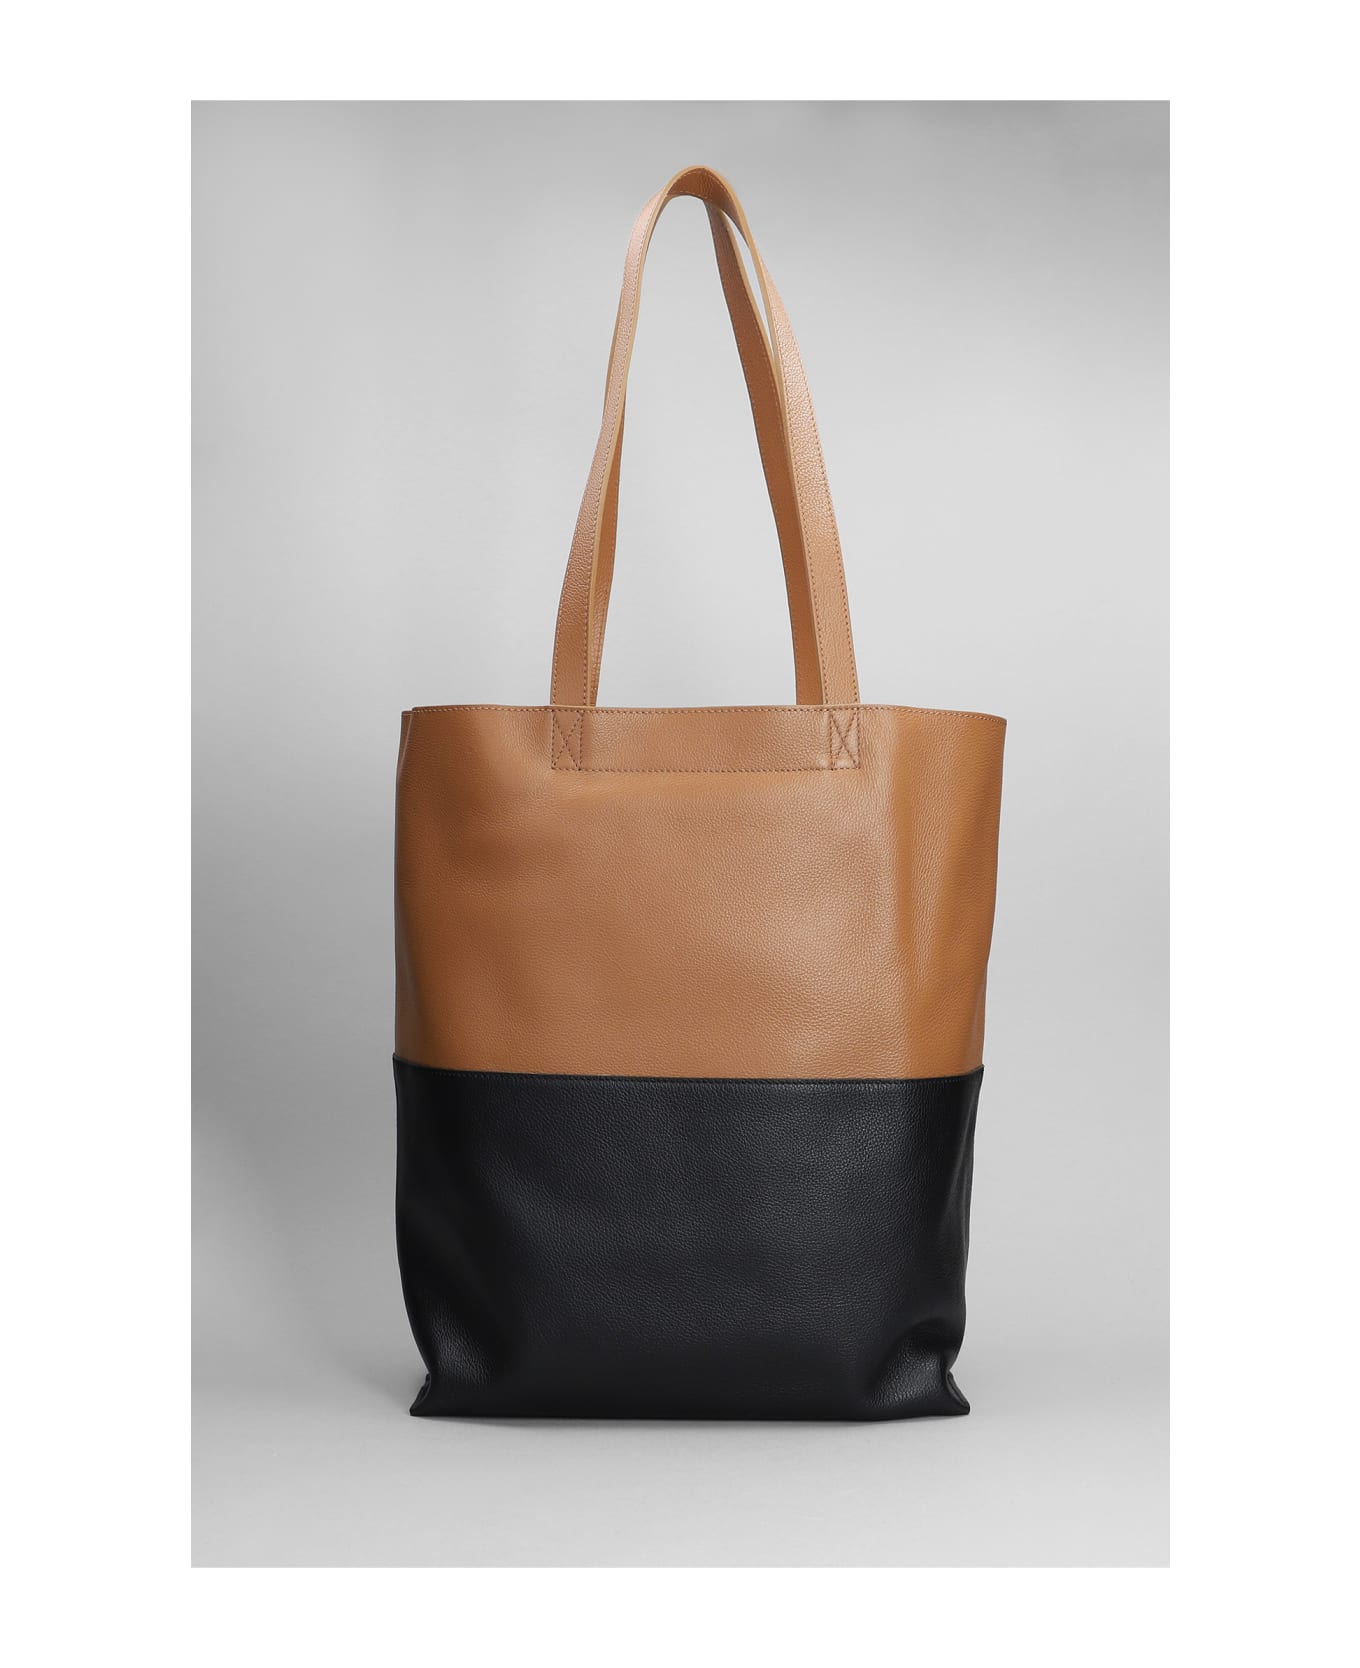 A.P.C. Maiko Bicolore Tote In Brown Leather - brown トートバッグ